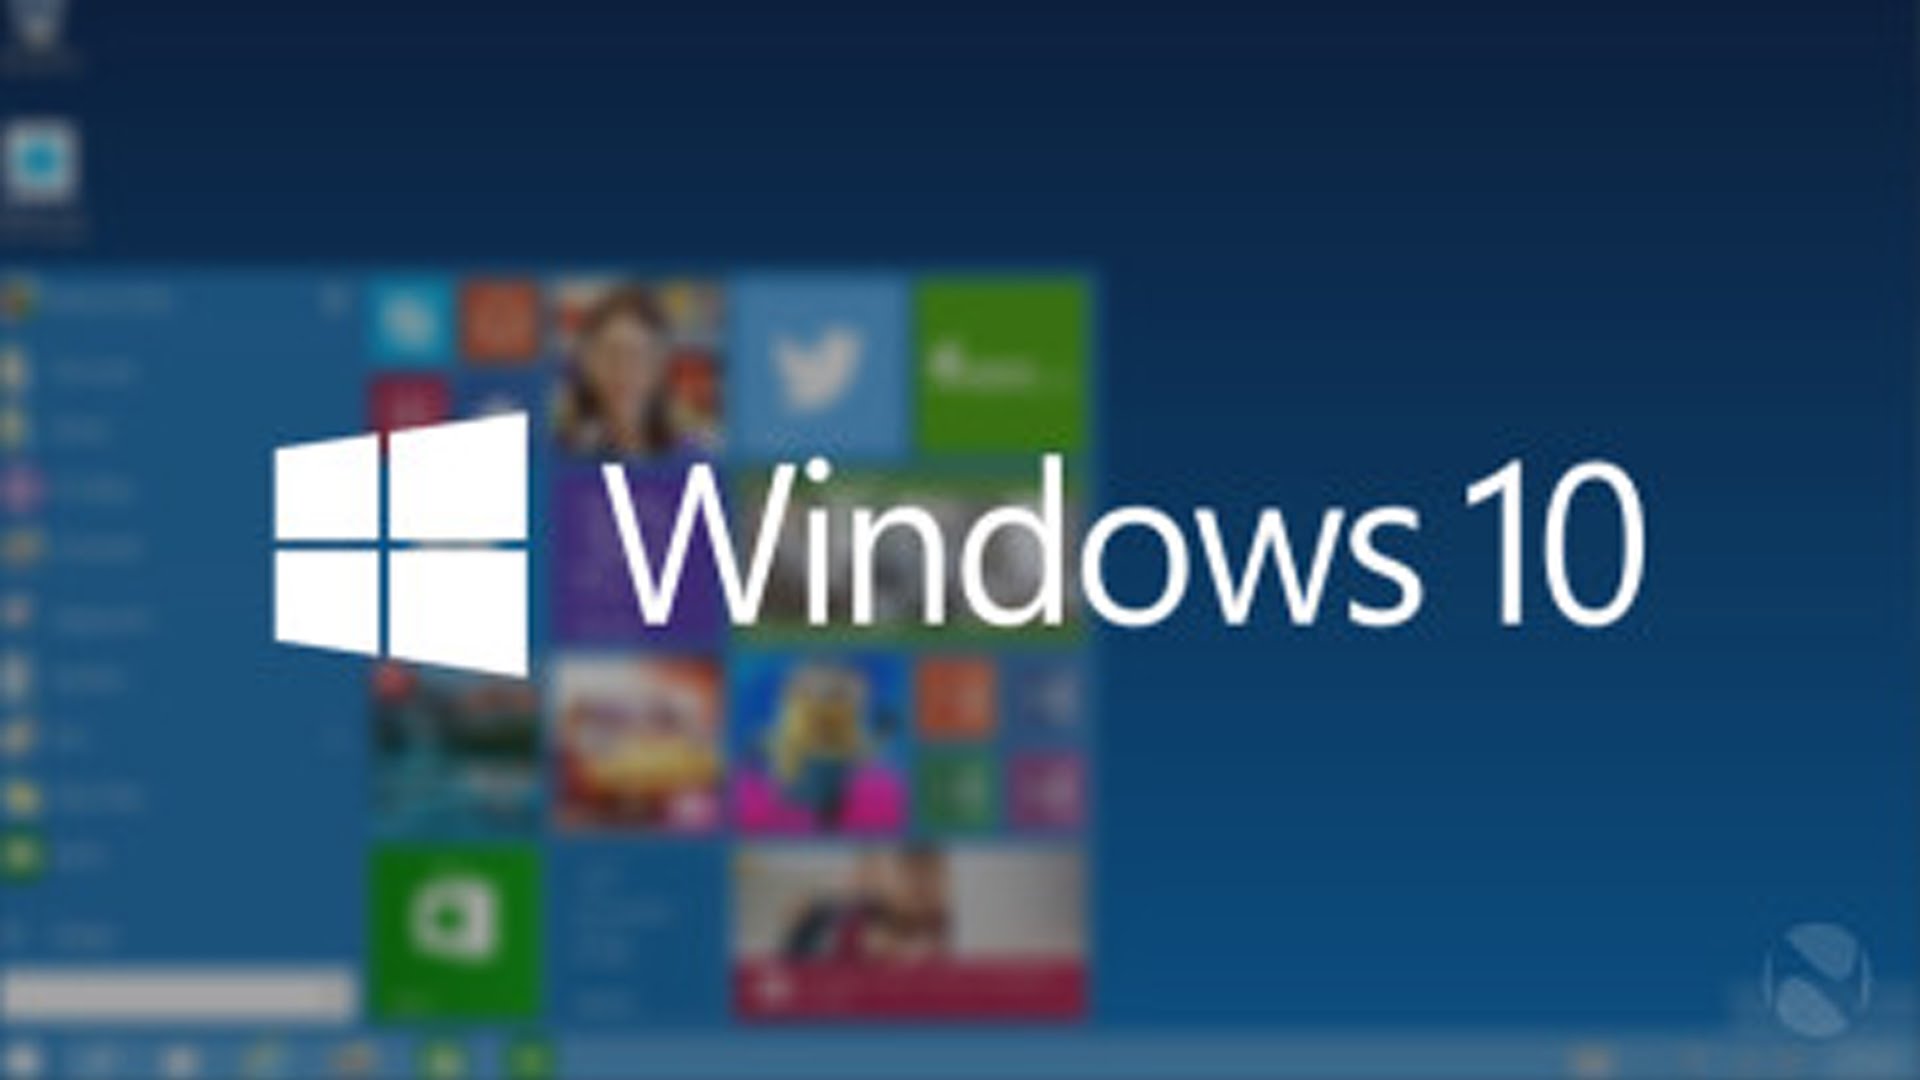 windows 8.1 pre activated iso key